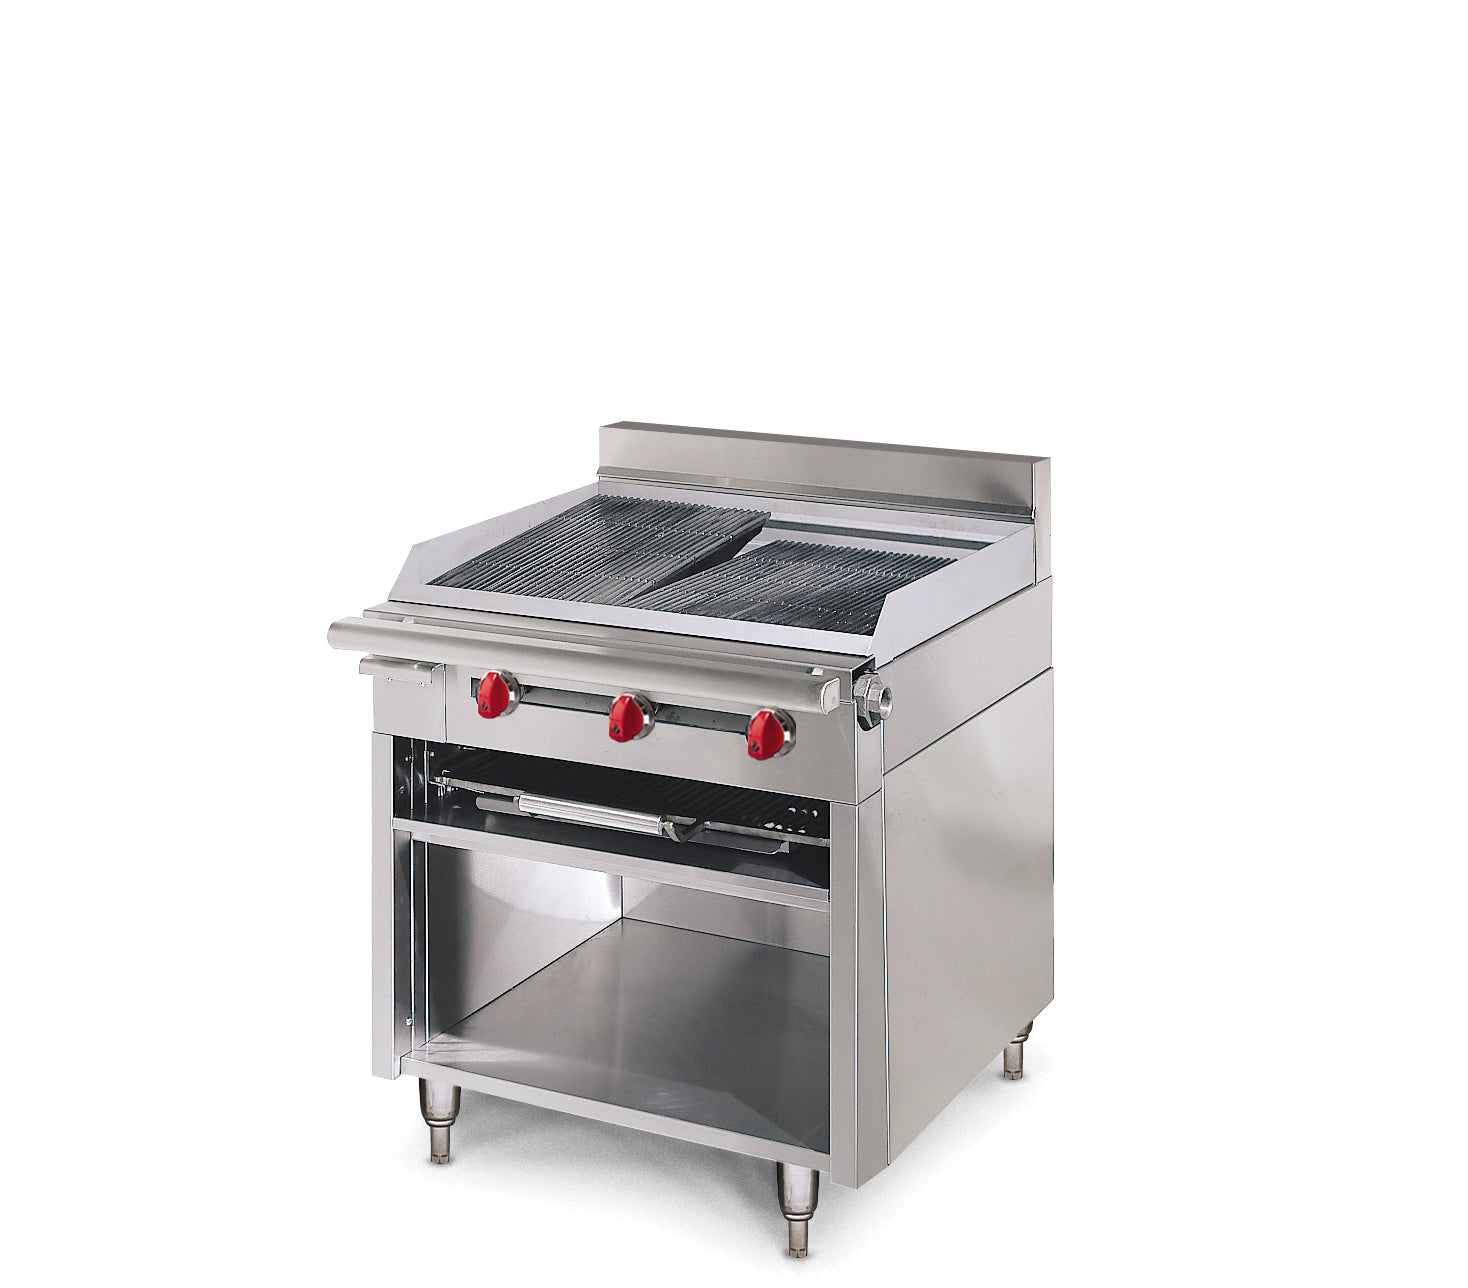 Medallion Heavy Duty Radiant Broiler with Pull-Out Rack